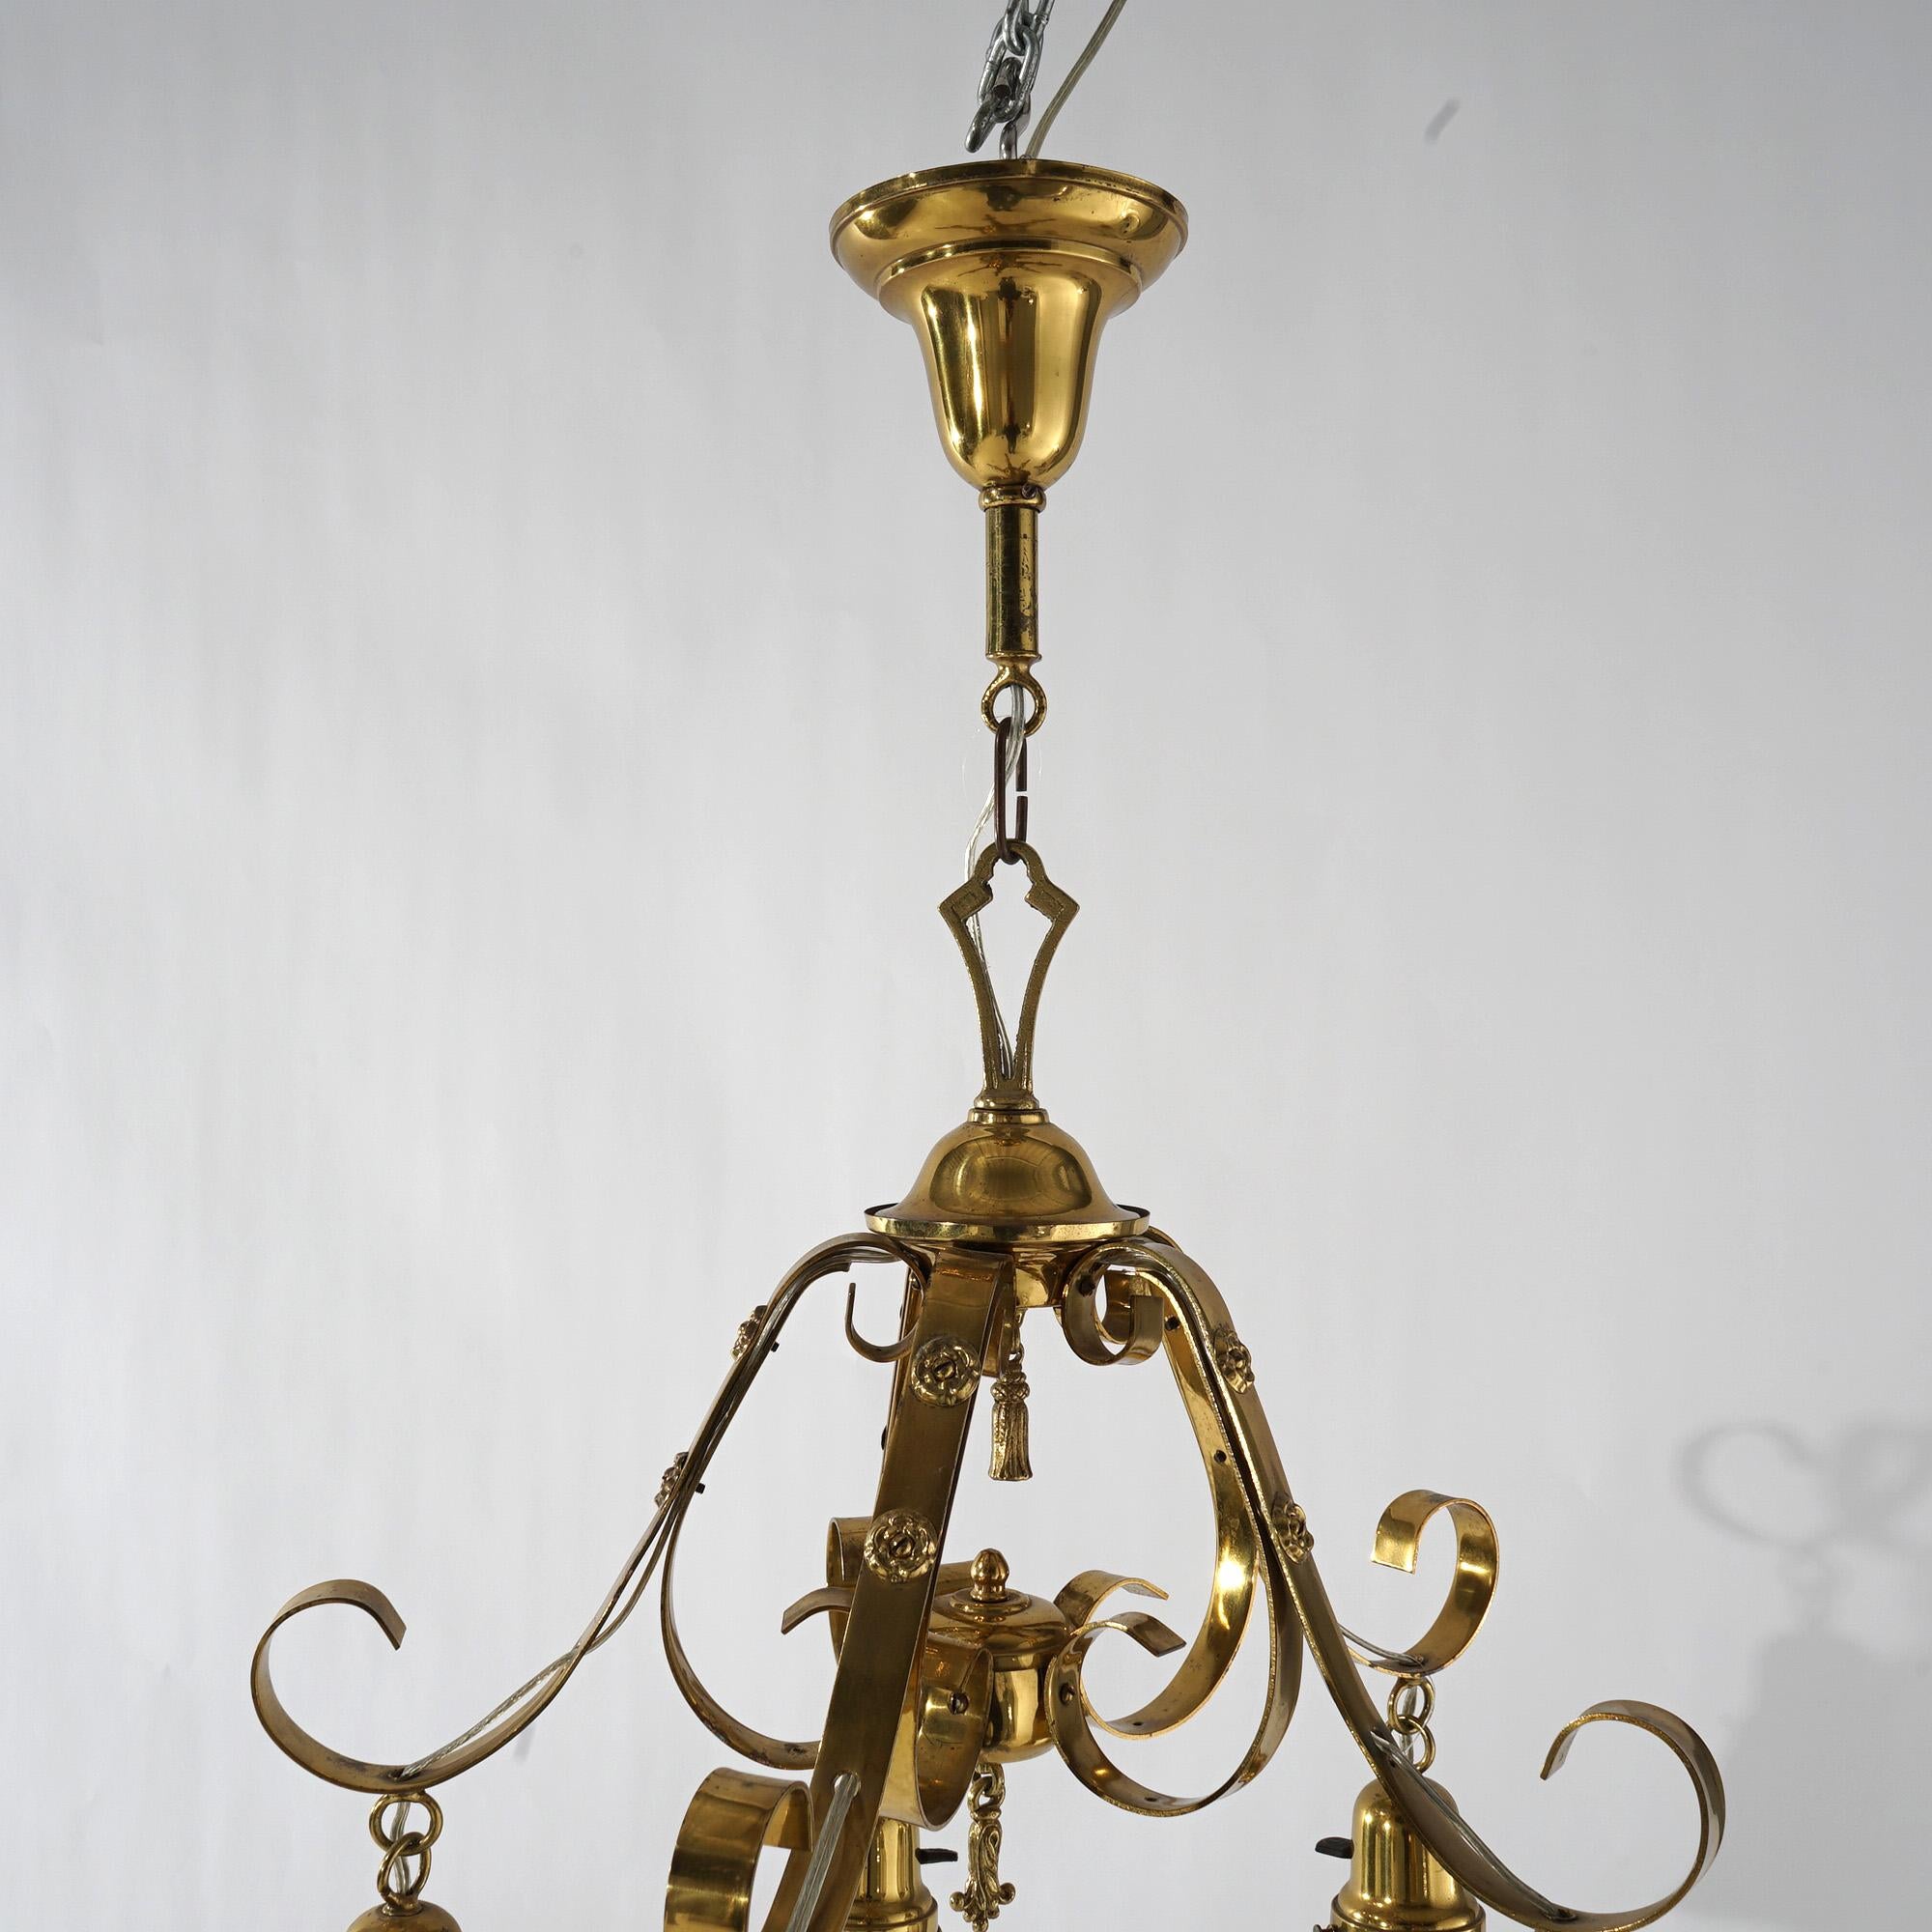 Antique Arts & Crafts Gilt Metal & Brass Hanging Fixture, Embossed Shades c1920 For Sale 5